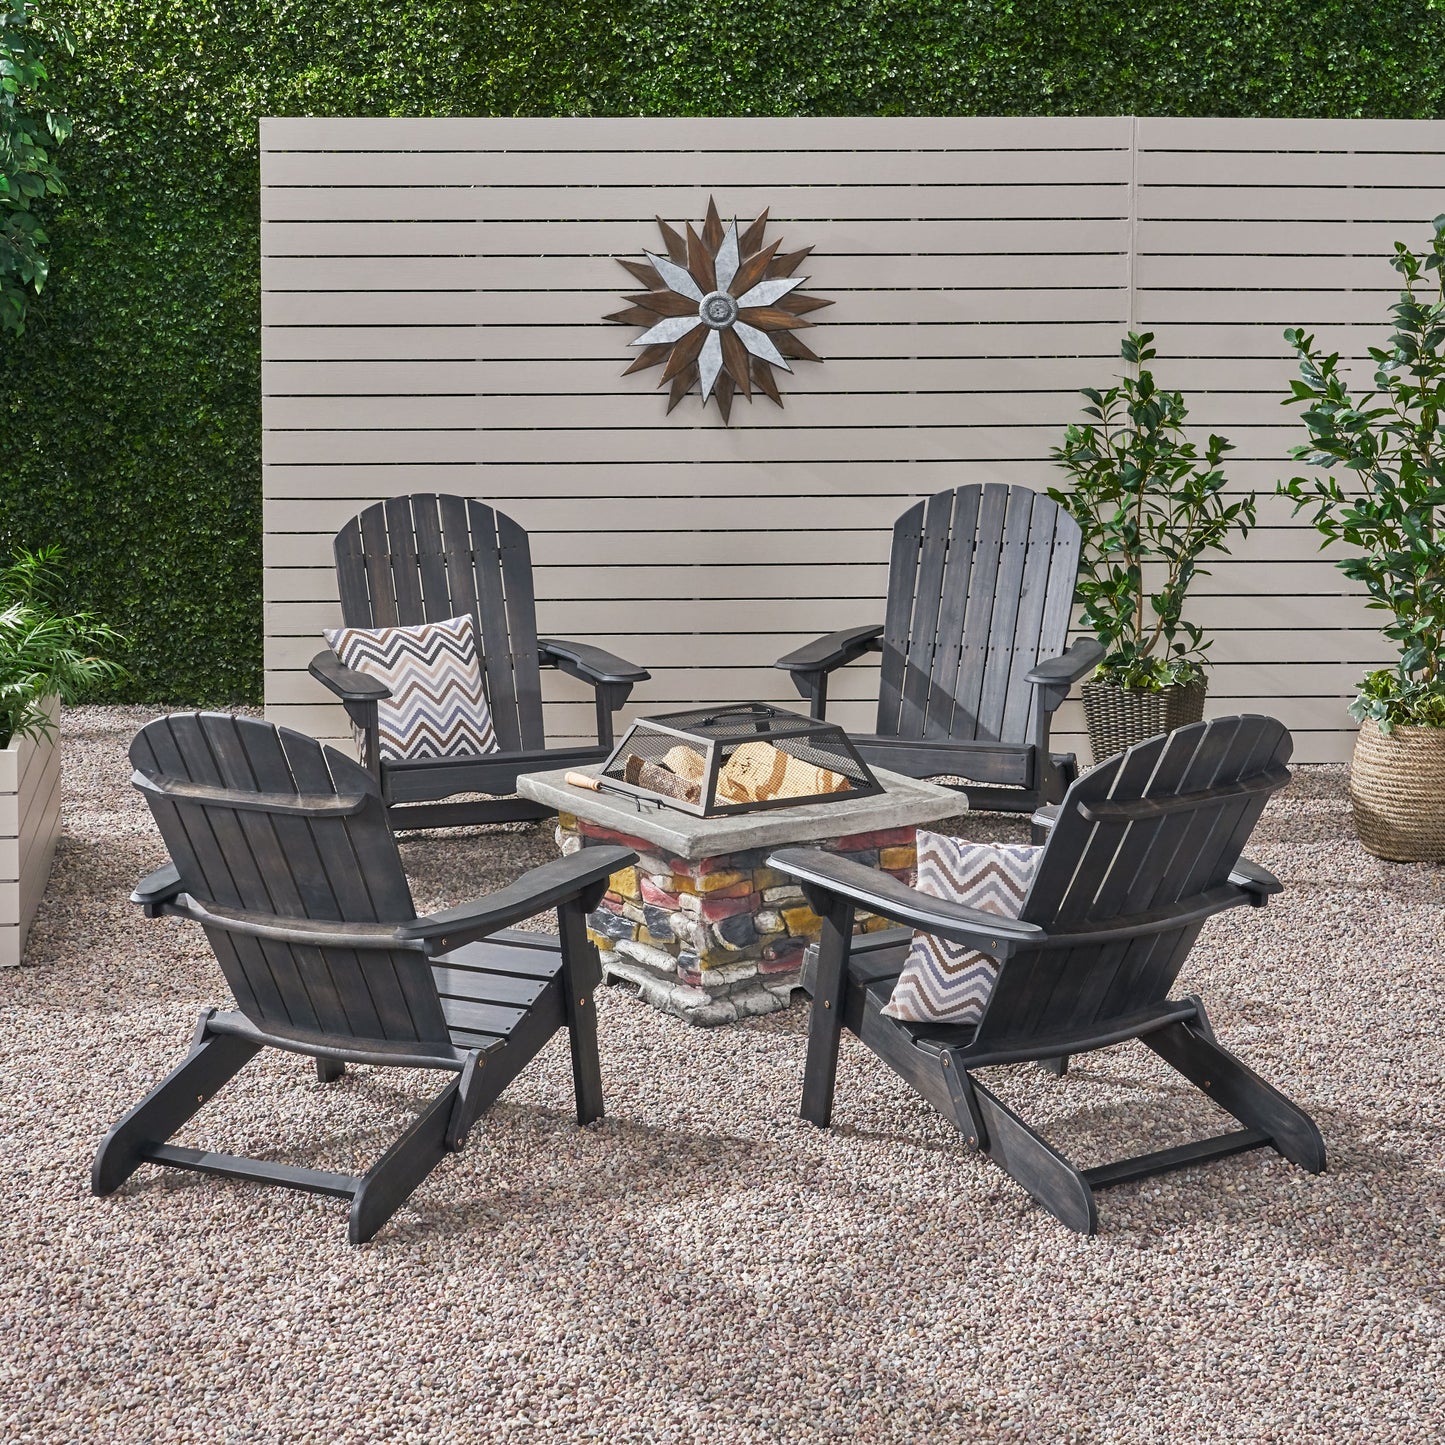 Benson Outdoor 5 Piece Acacia Wood/ Light Weight Concrete Adirondack Chair Set with Fire Pit